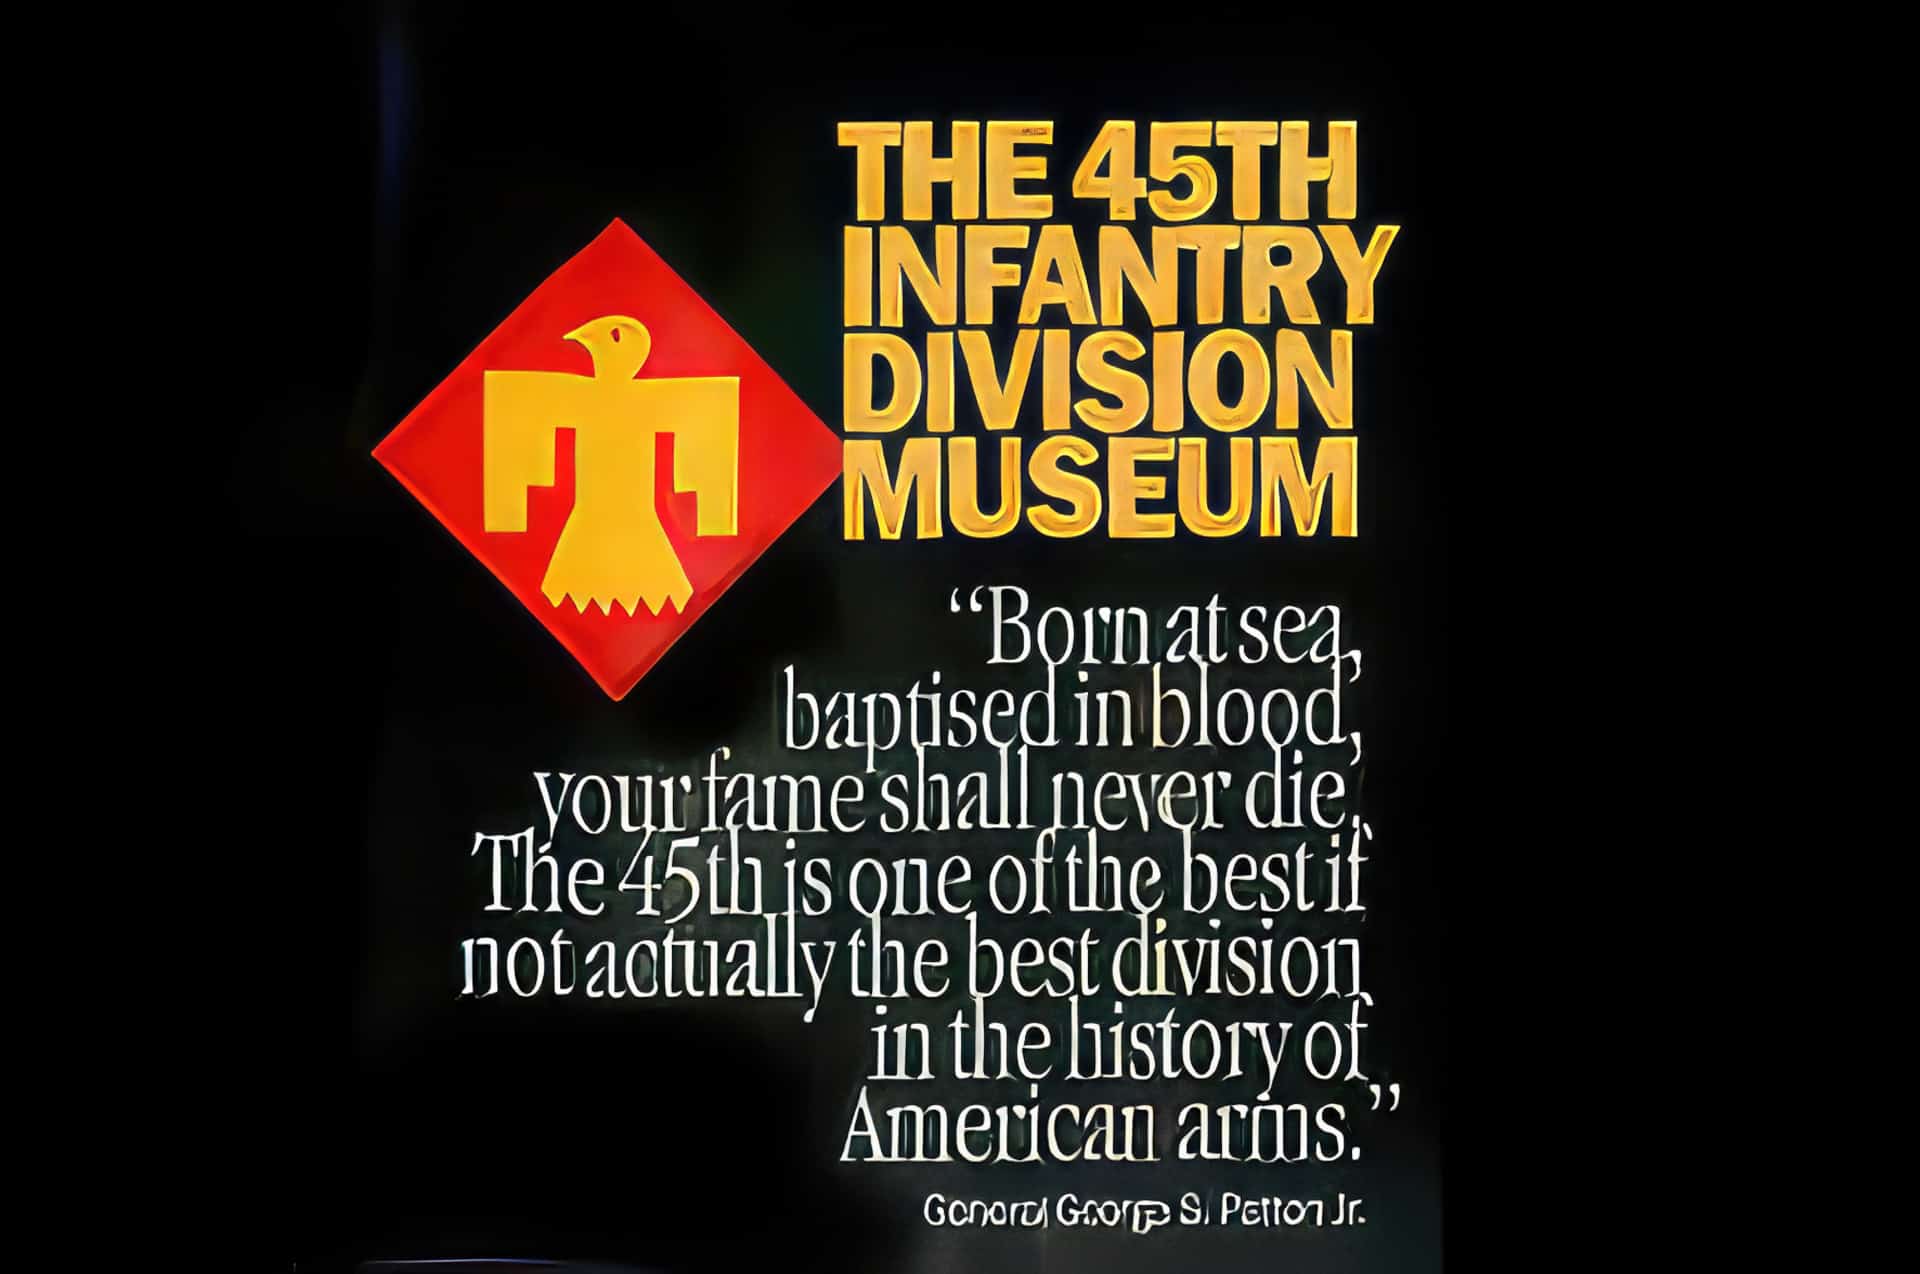 The 45th Infantry Division Museum.